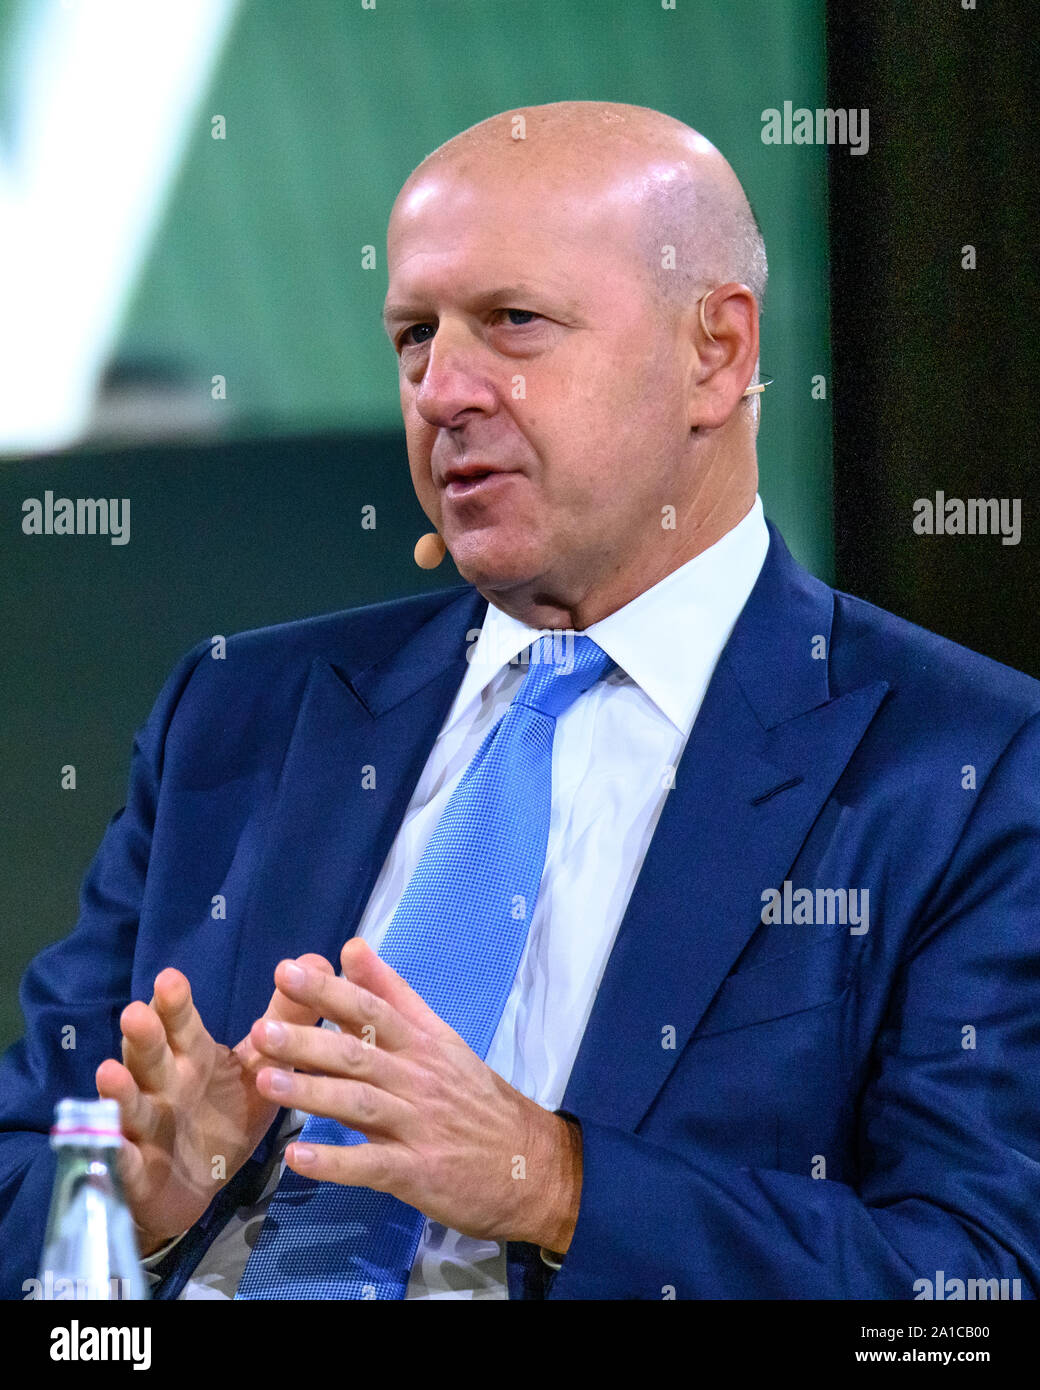 New York, USA. 25th Sep, 2019. Goldman Sachs Chairman and CEO David M. Solomon participates in the Bloomberg Global Business Forum 2019 at the Plaza hotel in New York City. Credit: Enrique Shore/Alamy Live News Stock Photo